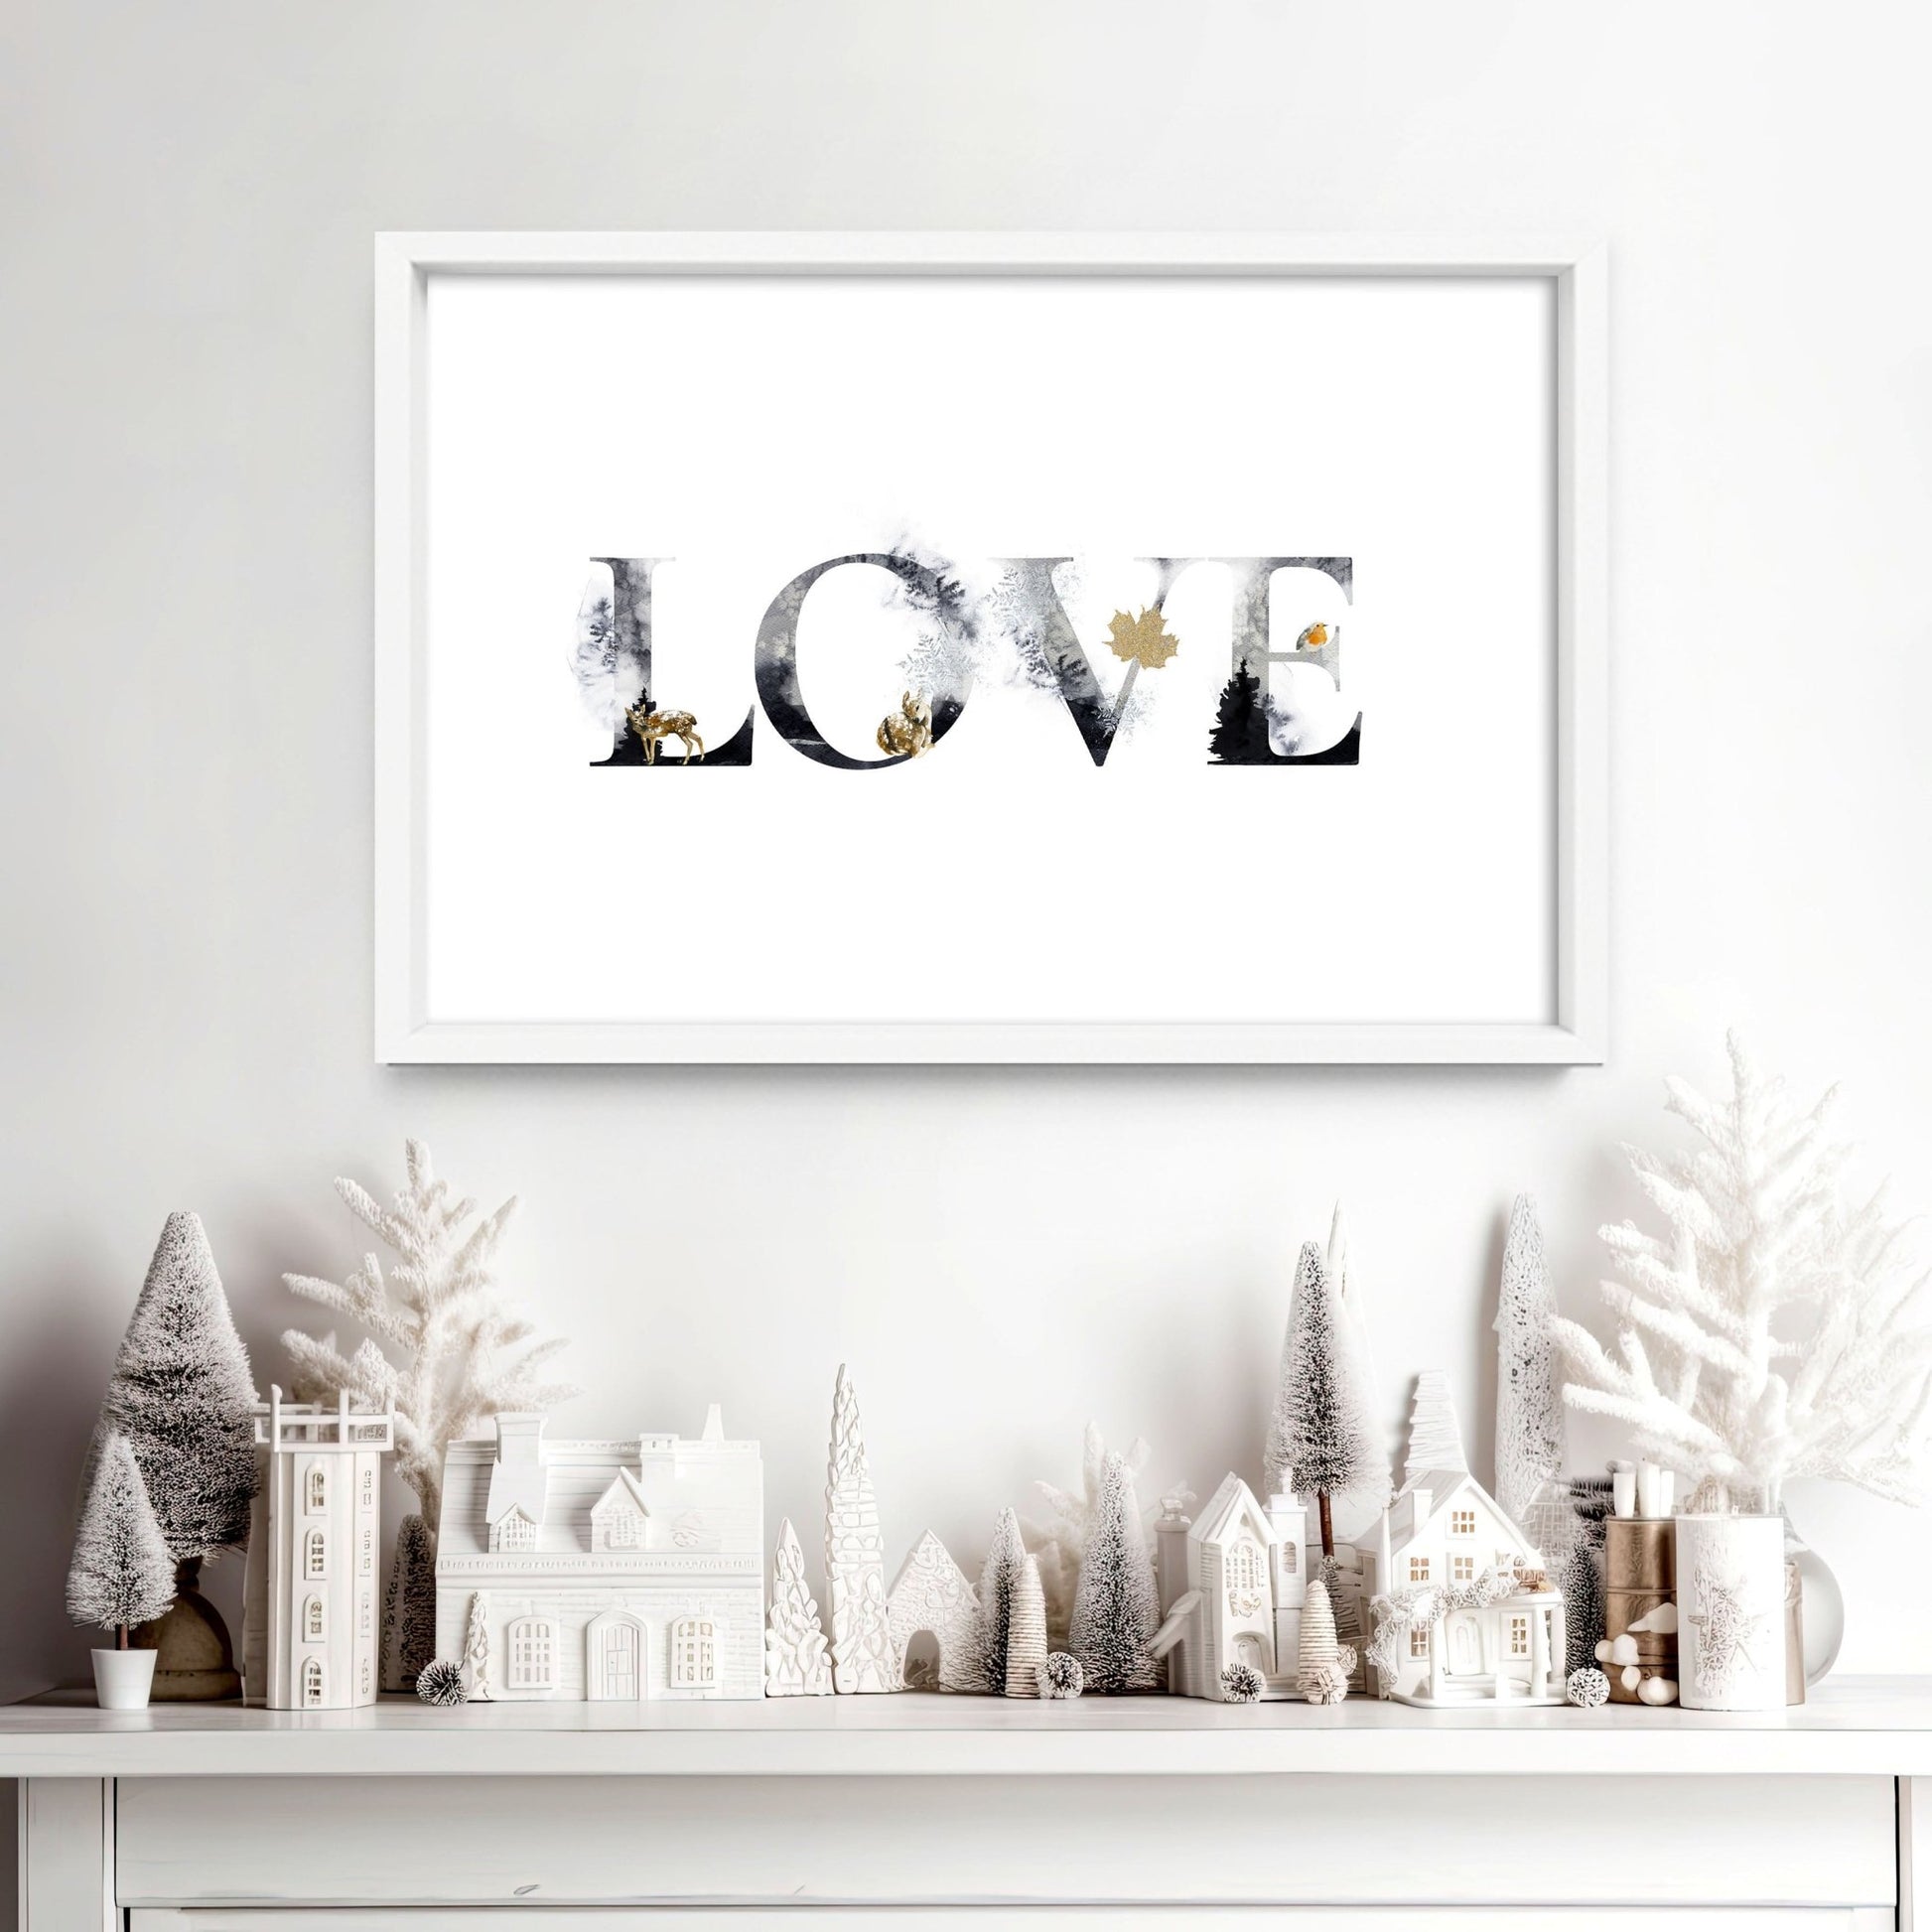 Love wall art for Christmas decor - About Wall Art